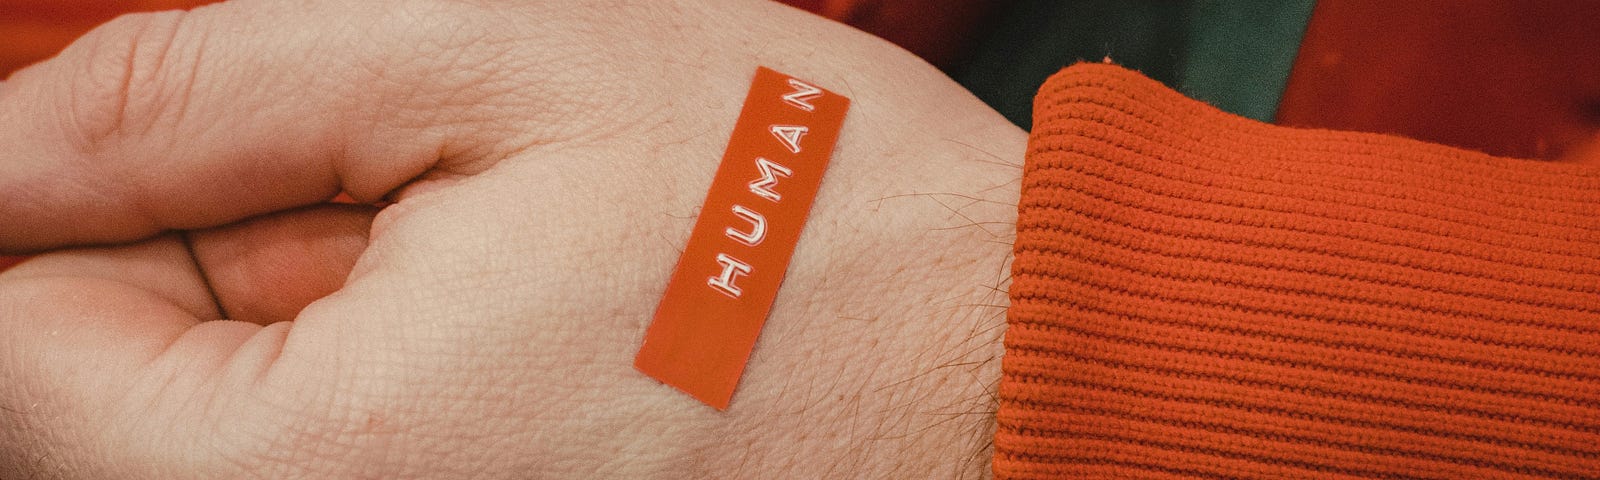 Closeup of a person’s hand with white skin that has an orange sticker on it which reads “human.” The person is wearing an orange coat with a gree shirt underneath.